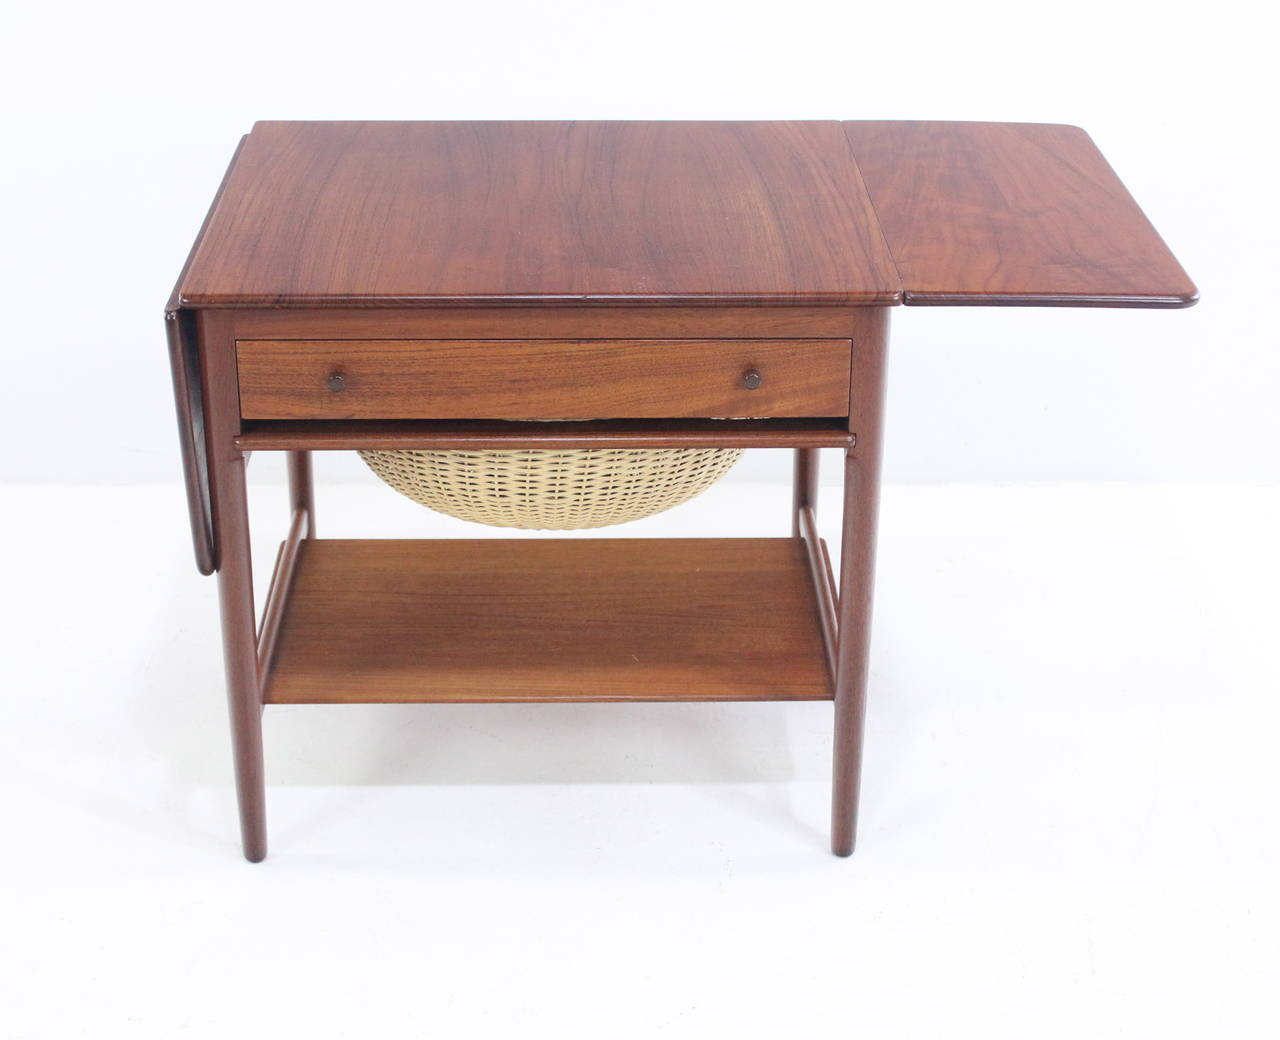 Classic Danish modern sewing table designed by Hans Wegner in the 1950s.
Andreas Tuck, maker. Model #33.
Richly grained teak.
Two drop leaves fold out, providing overall width of 46